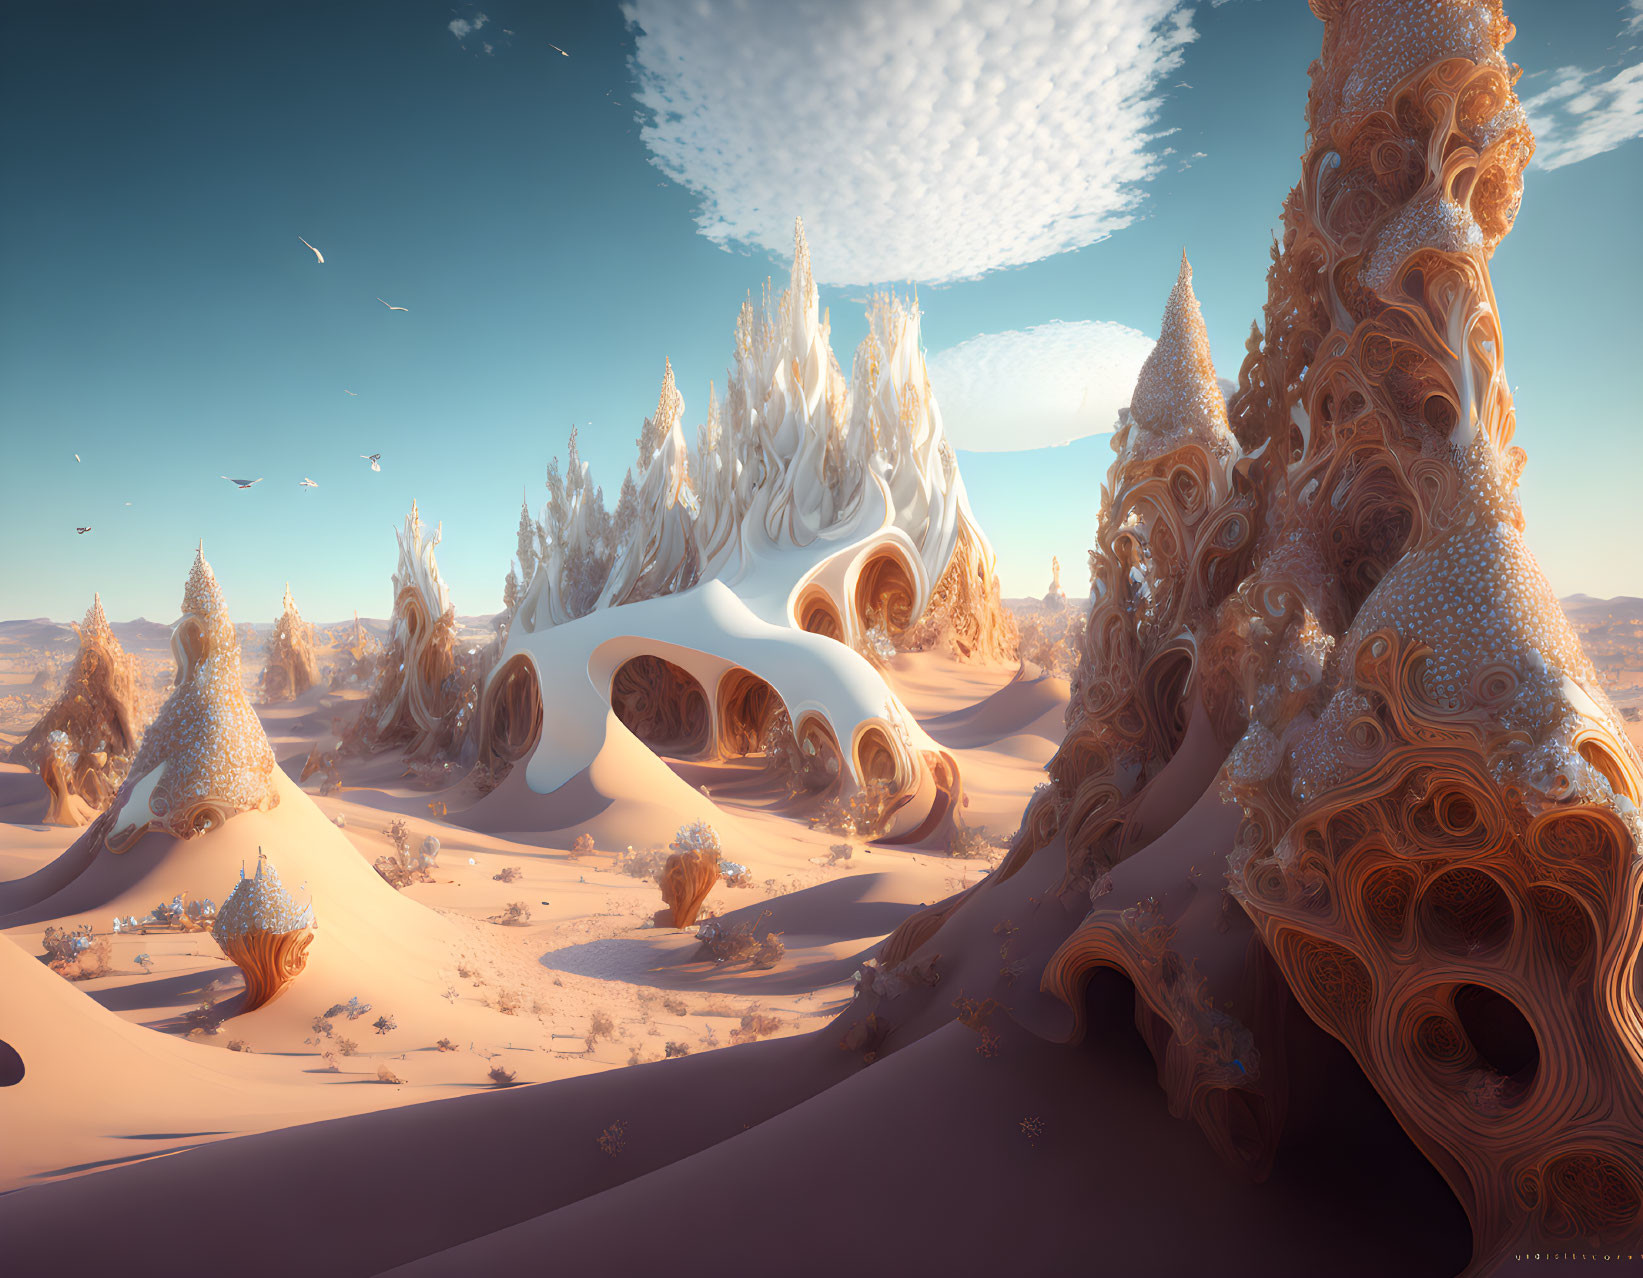 Surreal desert landscape with shell-like structures and trees under blue sky